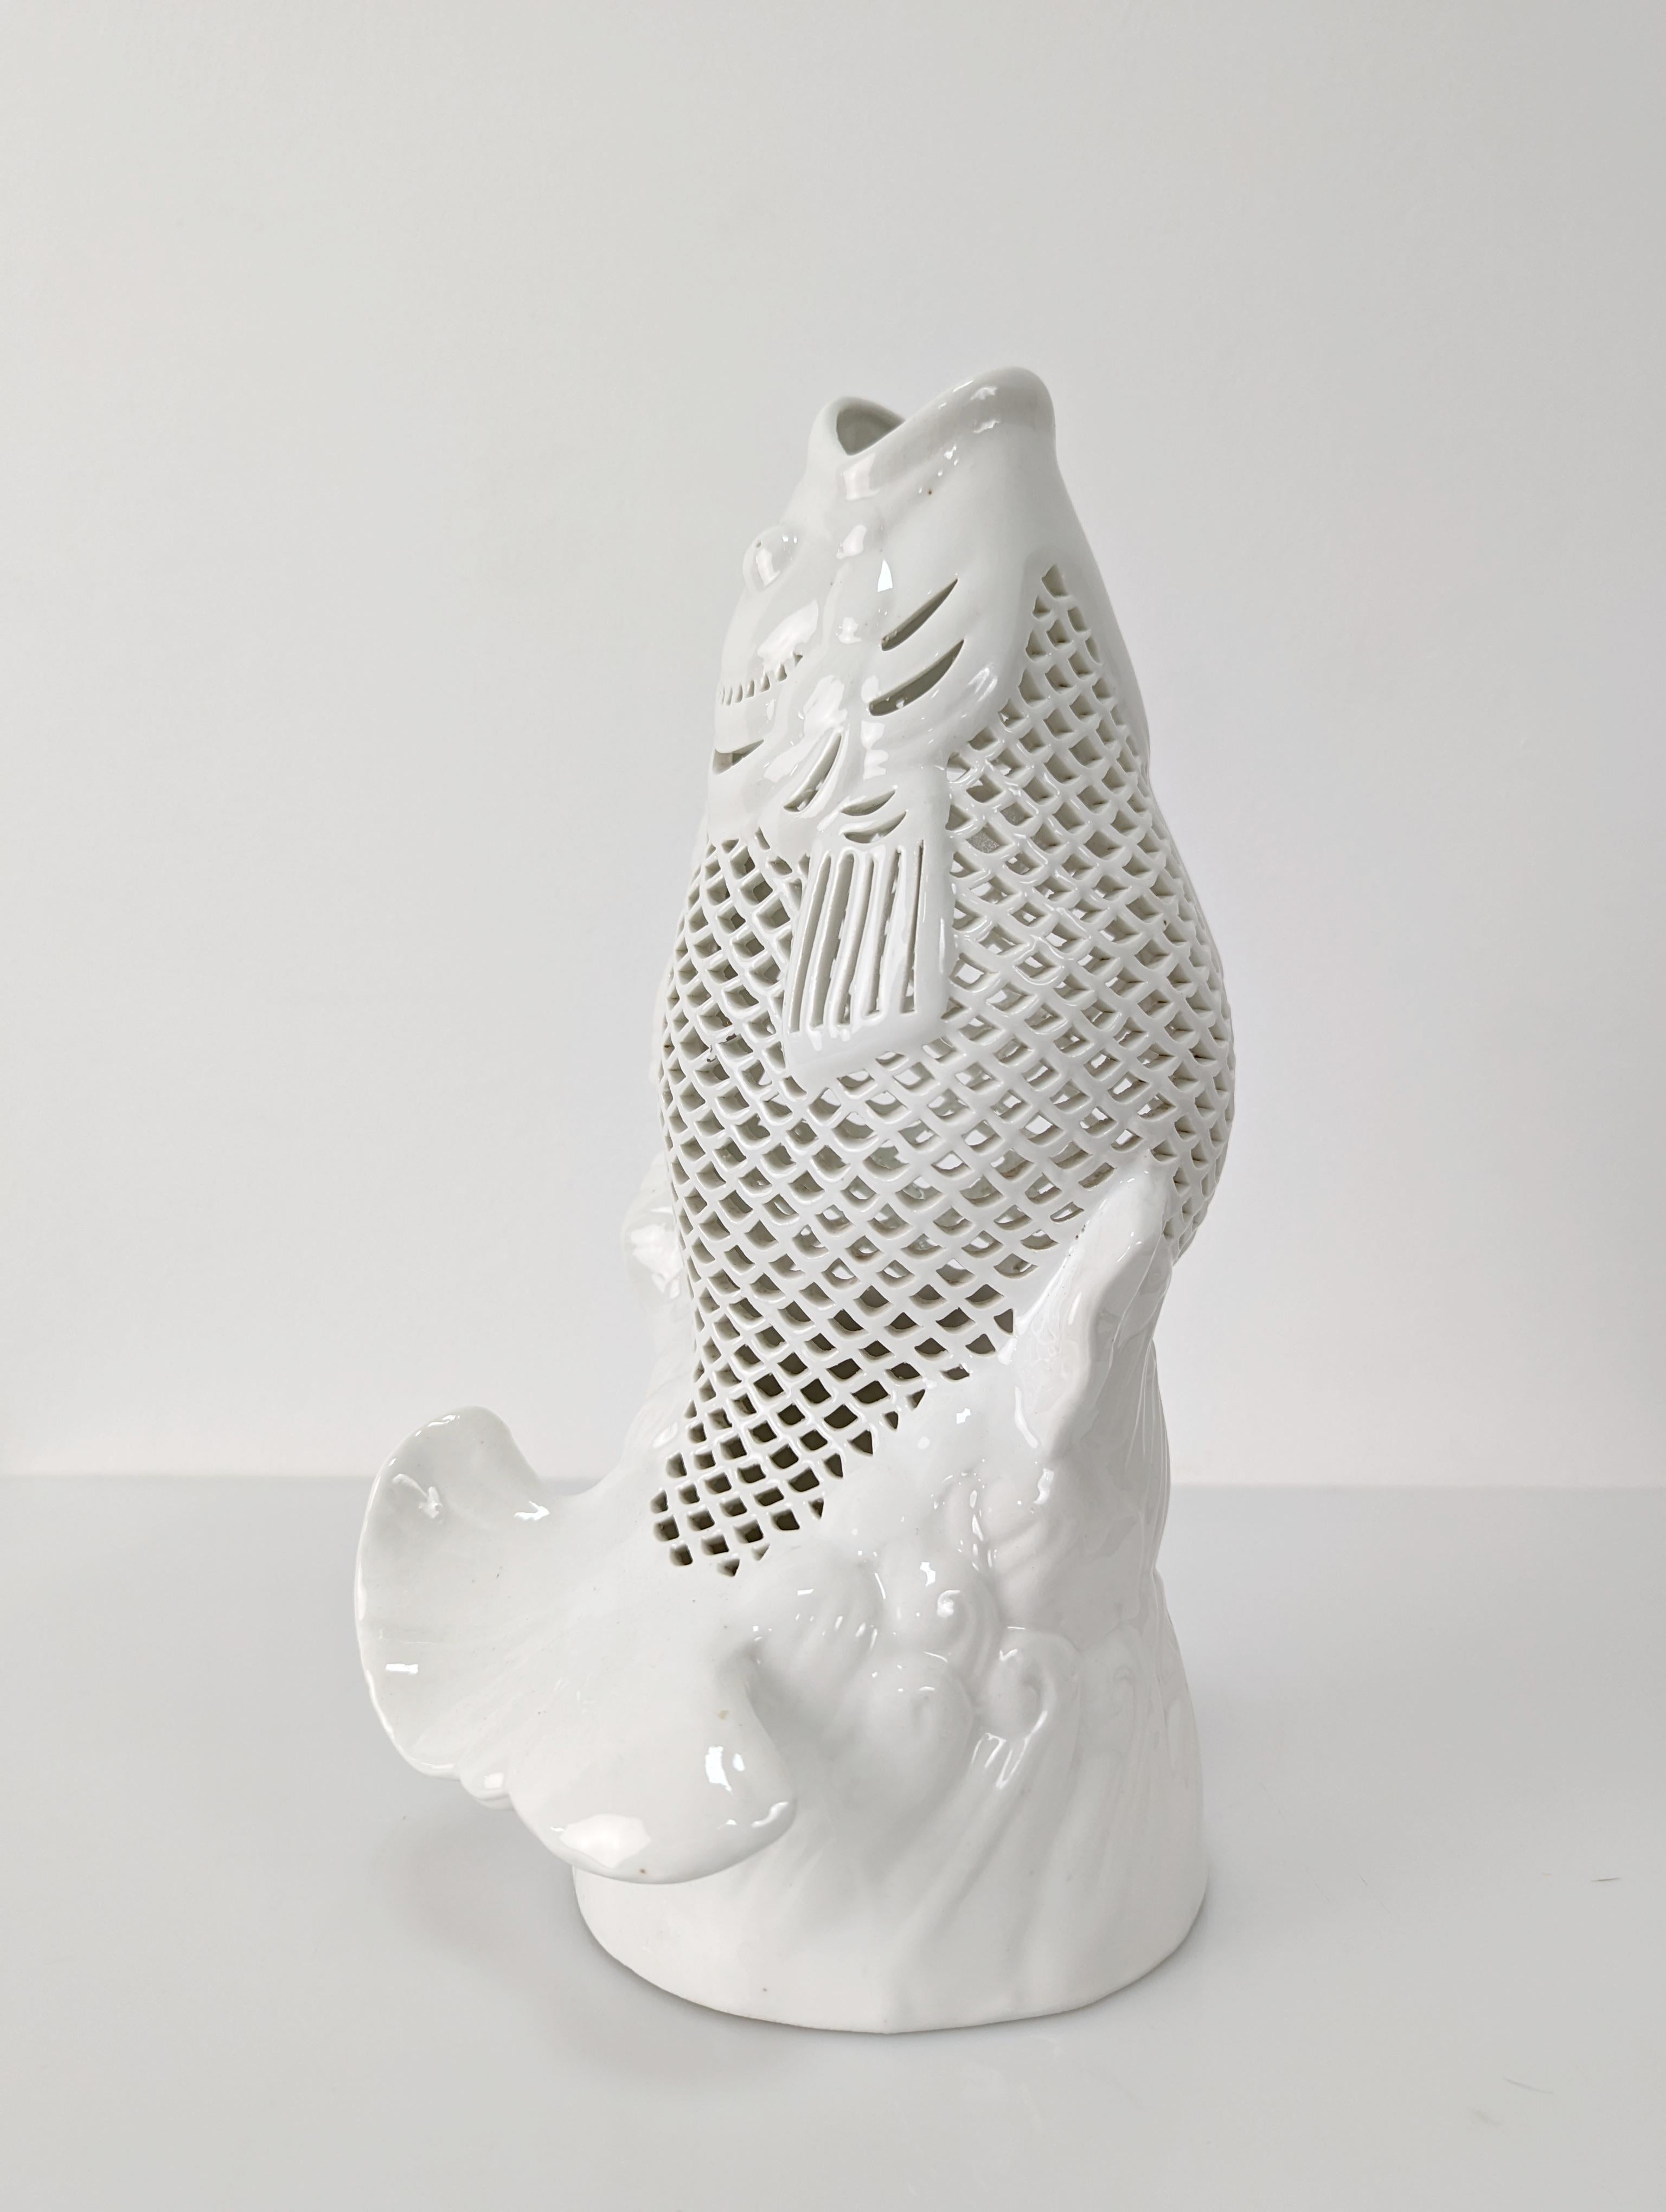 Beautiful sculpture representing a carp jumping over the water, made of white reticulated porcelain from China, specifically this type of piece can be found in areas of Hong Kong in the mid-20th century.